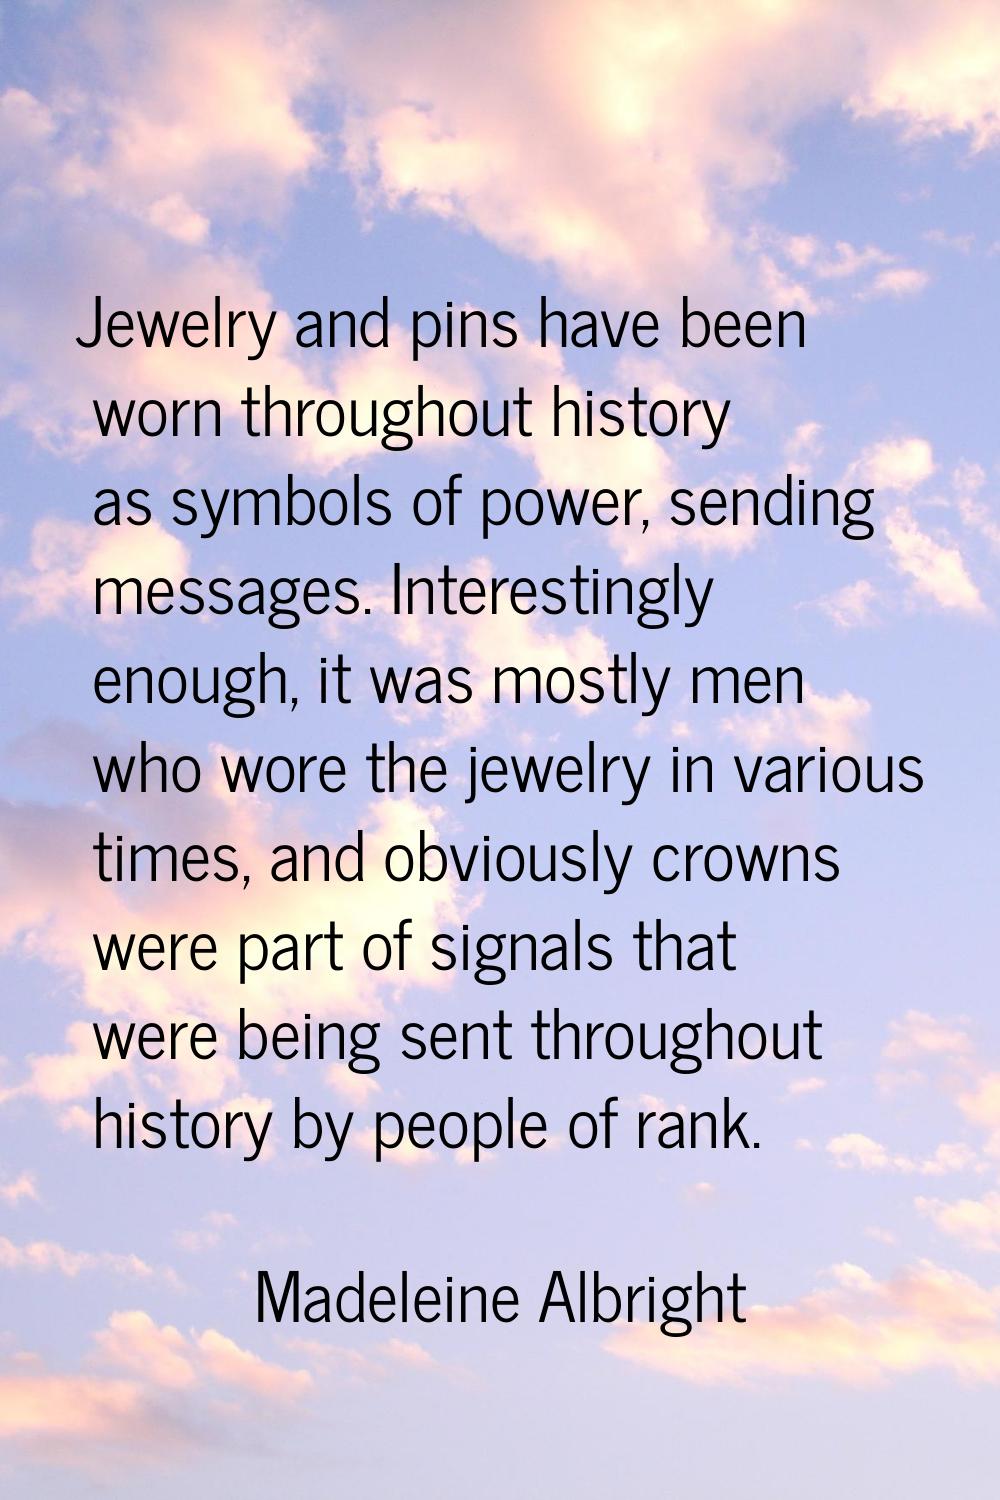 Jewelry and pins have been worn throughout history as symbols of power, sending messages. Interesti